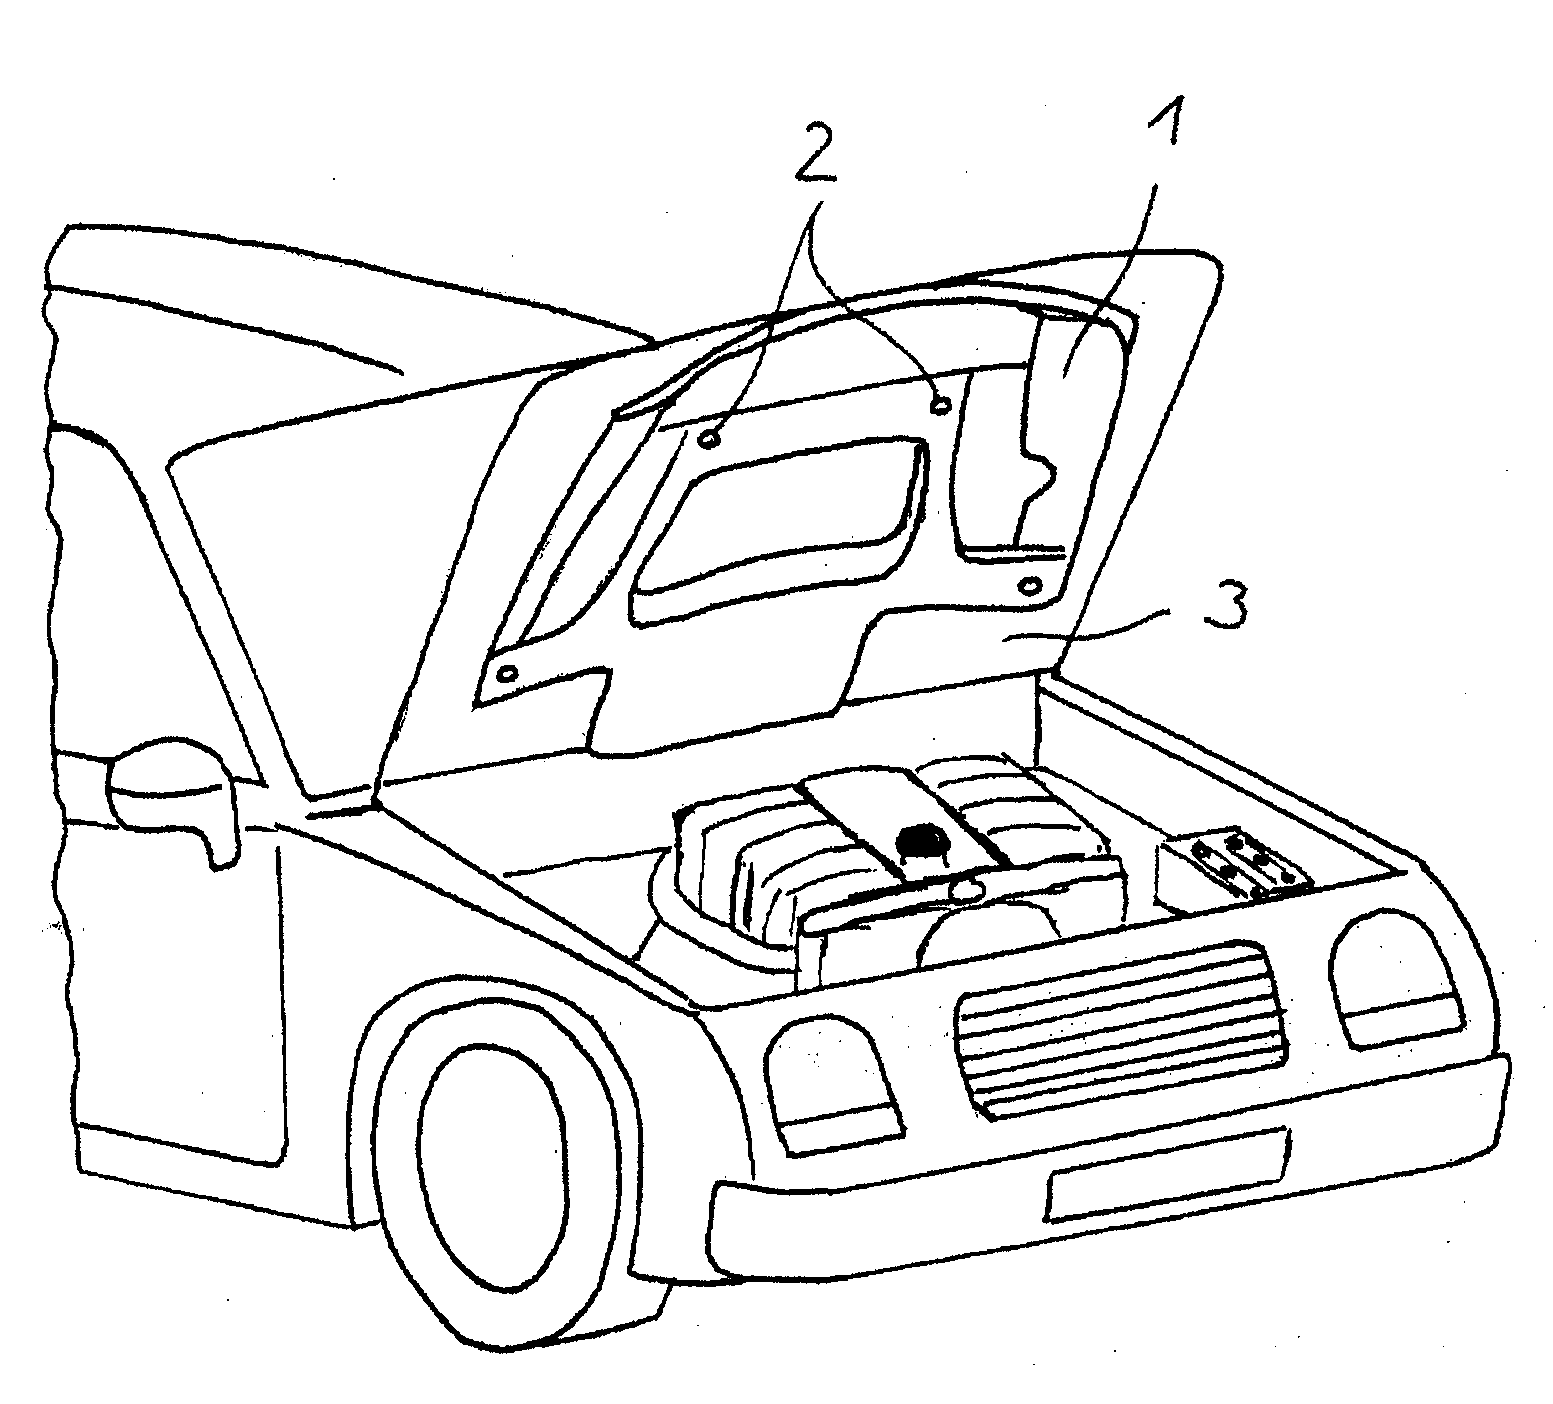 Sound-absorbing engine compartment lining for motor vehicles